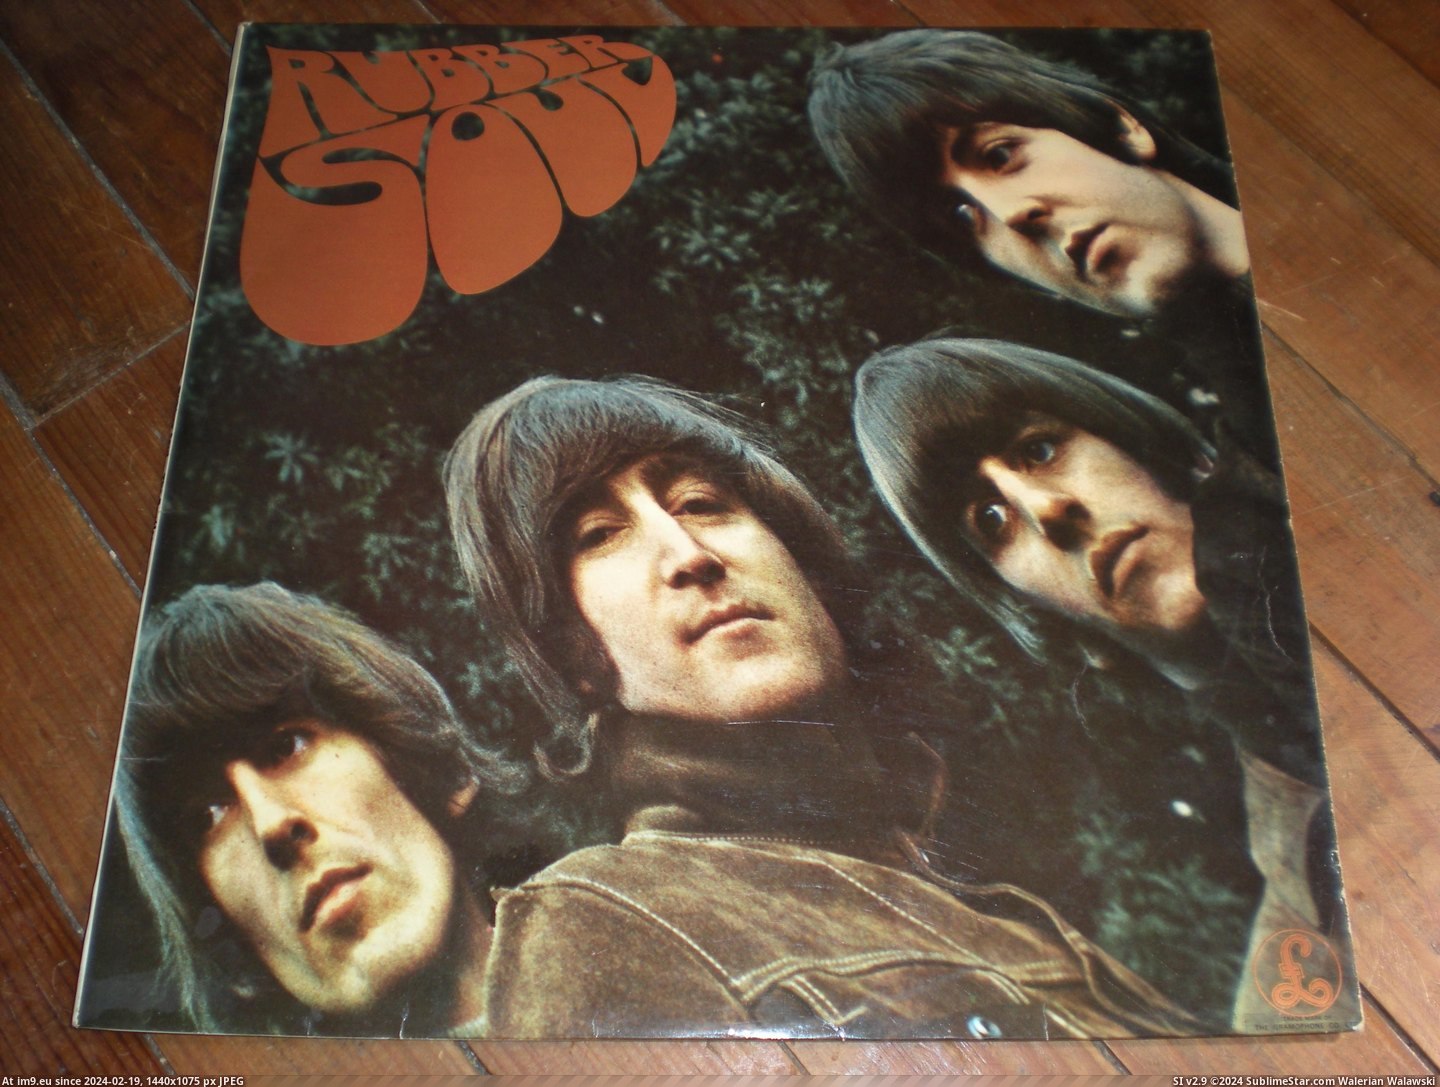 #Rubber #Stereo #Soul Rubber Soul STEREO 6 Pic. (Image of album new 1))